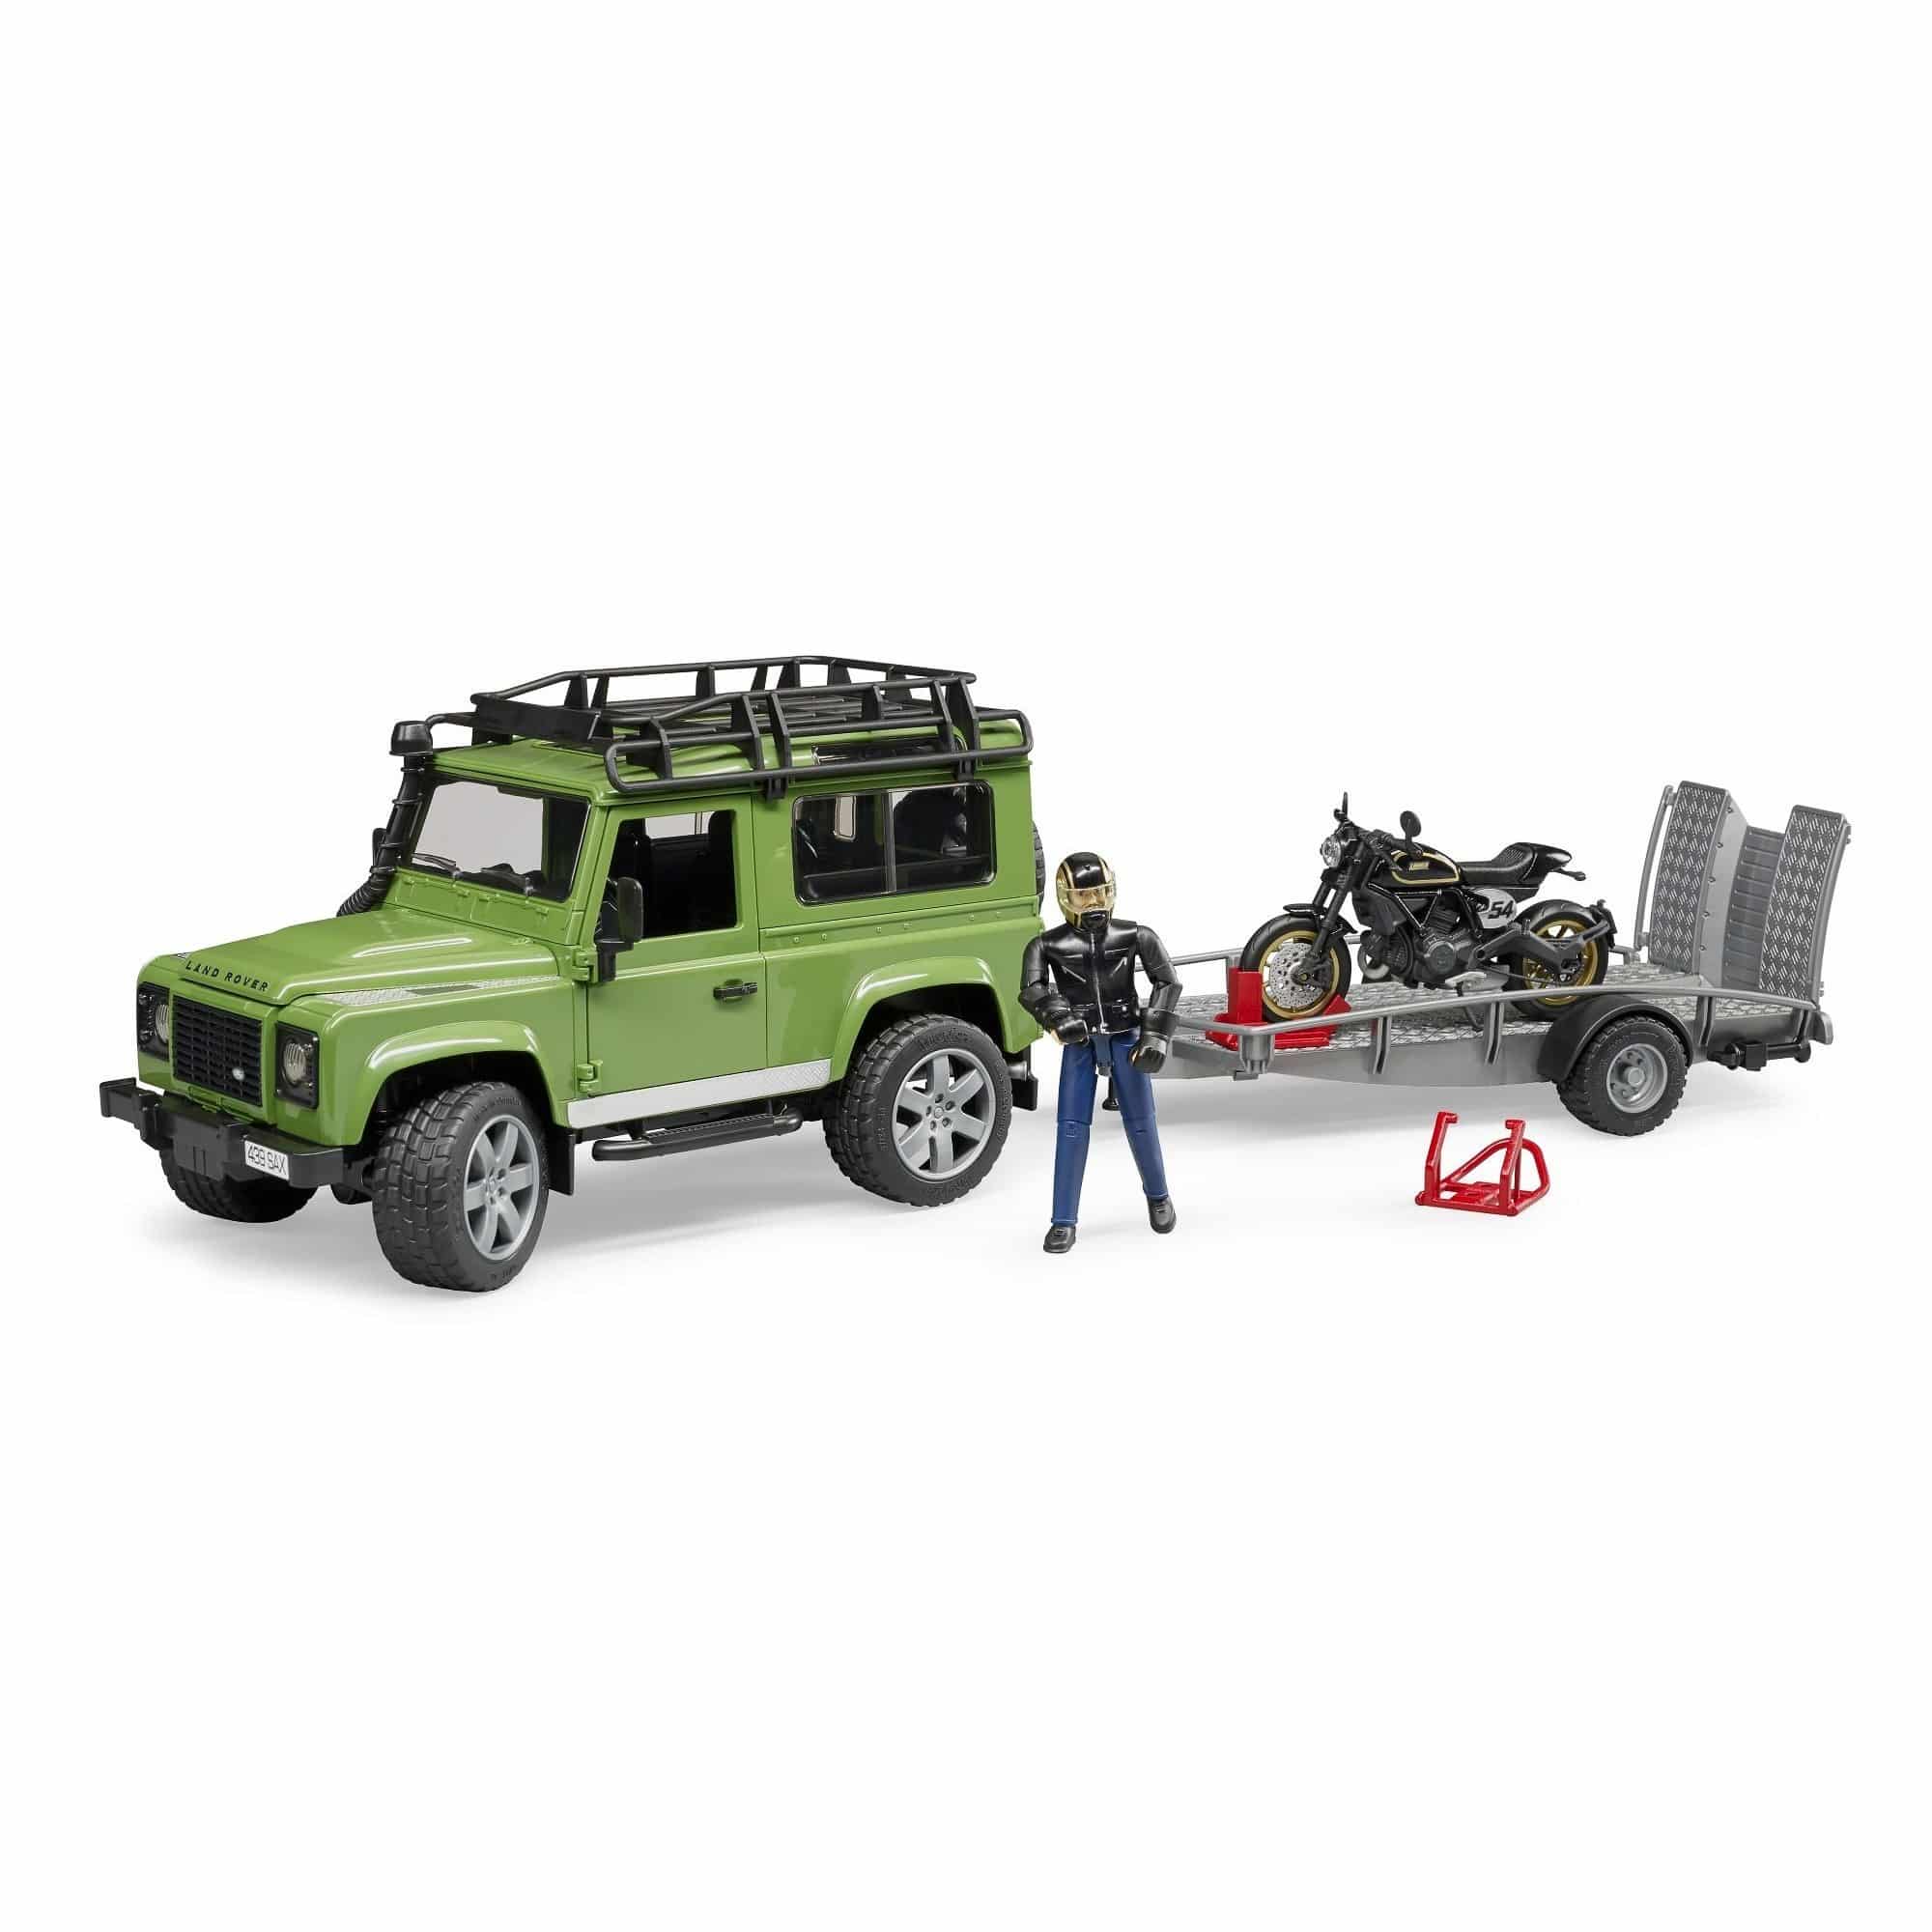 Bruder - Land Rover Defender Station Wagon with Trailer, Ducati, and Rider